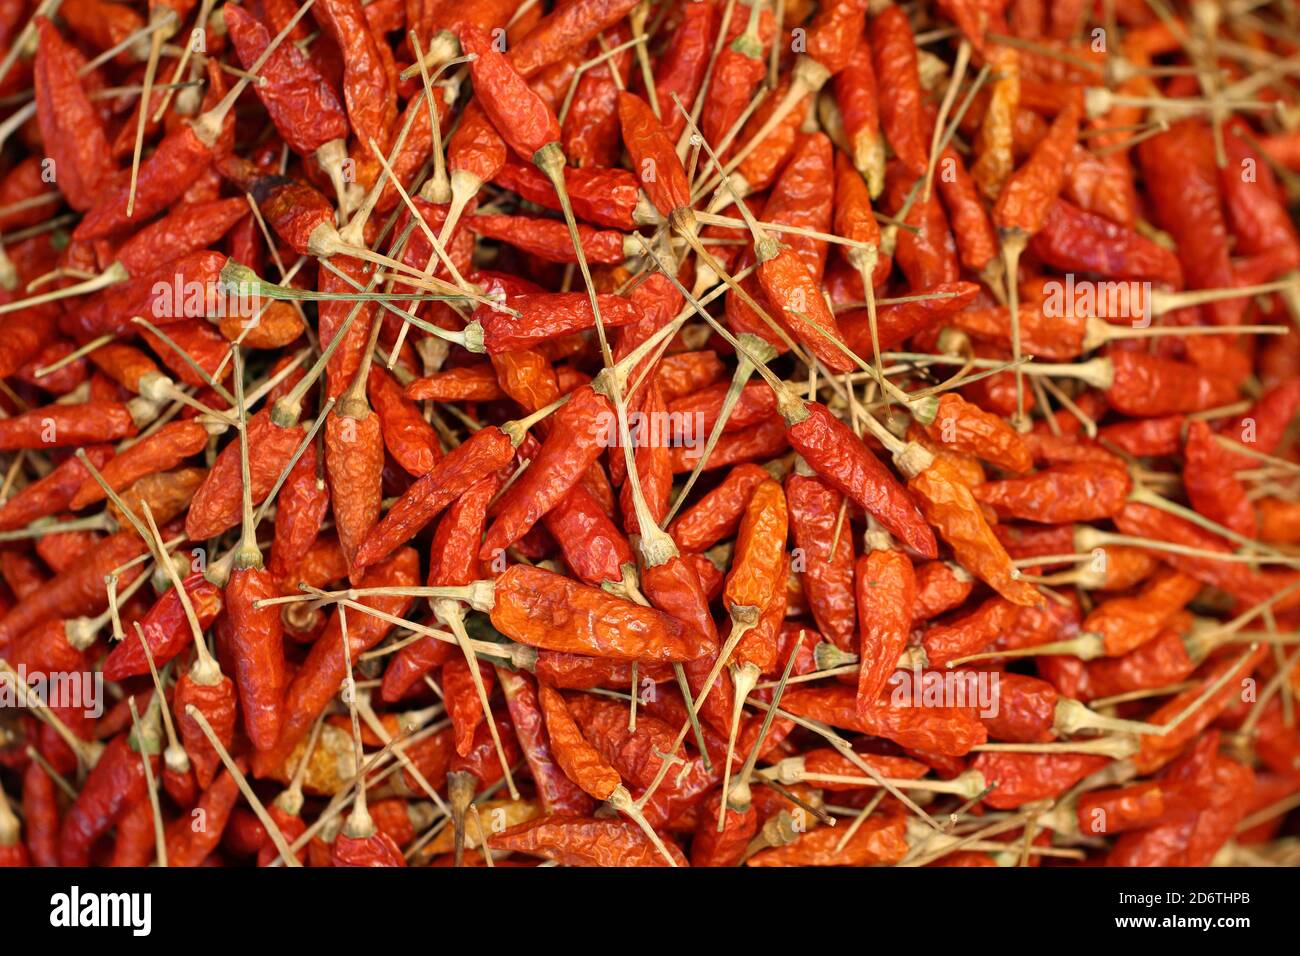 Dry bird/karen chili (Capsicum frutescens) pods background. A very hot wild chili pepper use as a flavouring in food industry. Stock Photo